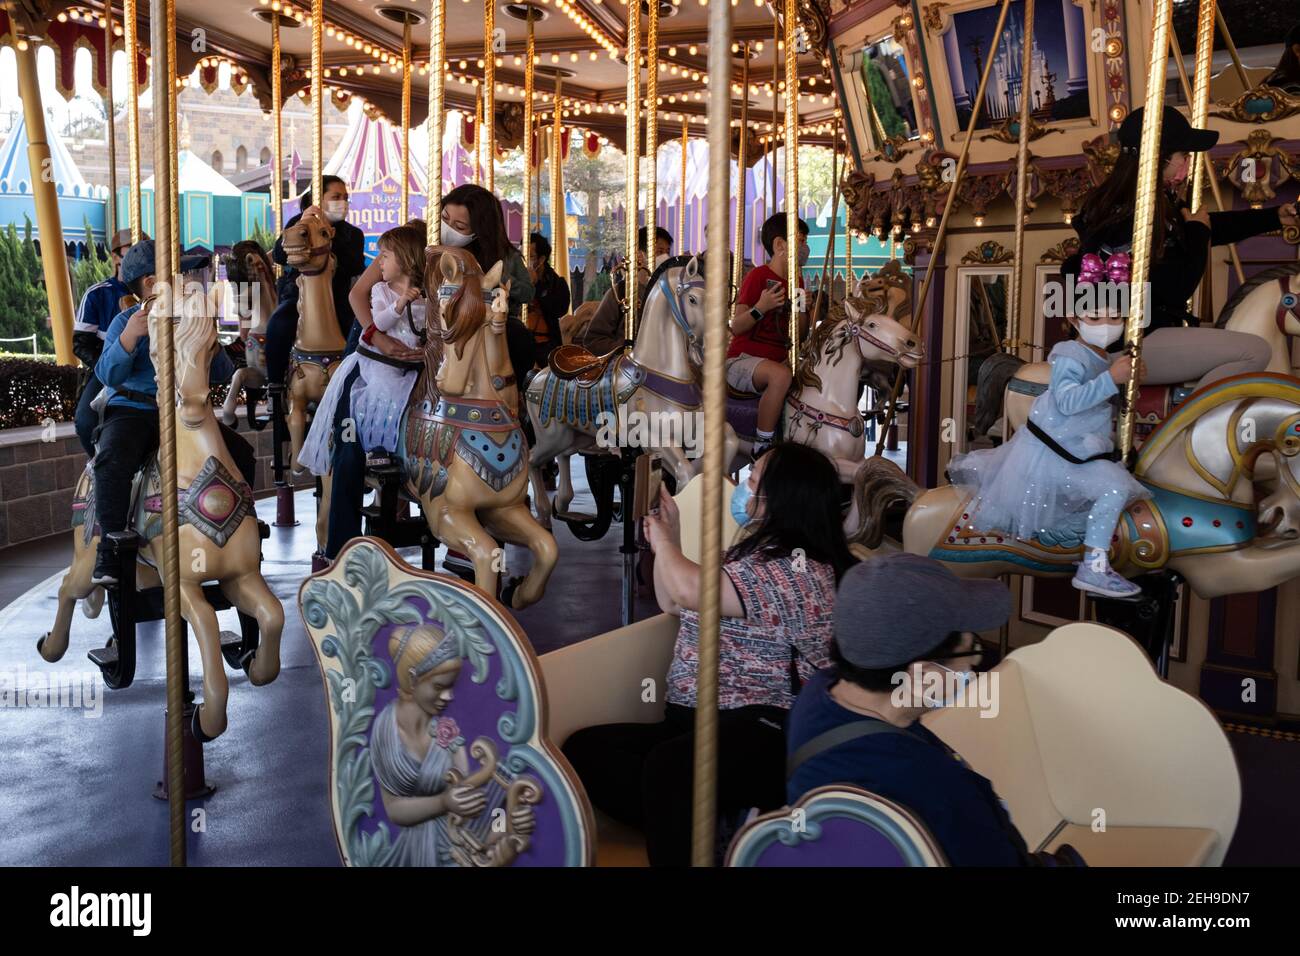 Visitors wearing face masks as a precaution against the spread of coronavirus, ride the Cinderella Carousel during the reopening of Hong Kong Disneyland Park as government loosens coronavirus (Covid-19) social-distancing measures. Stock Photo